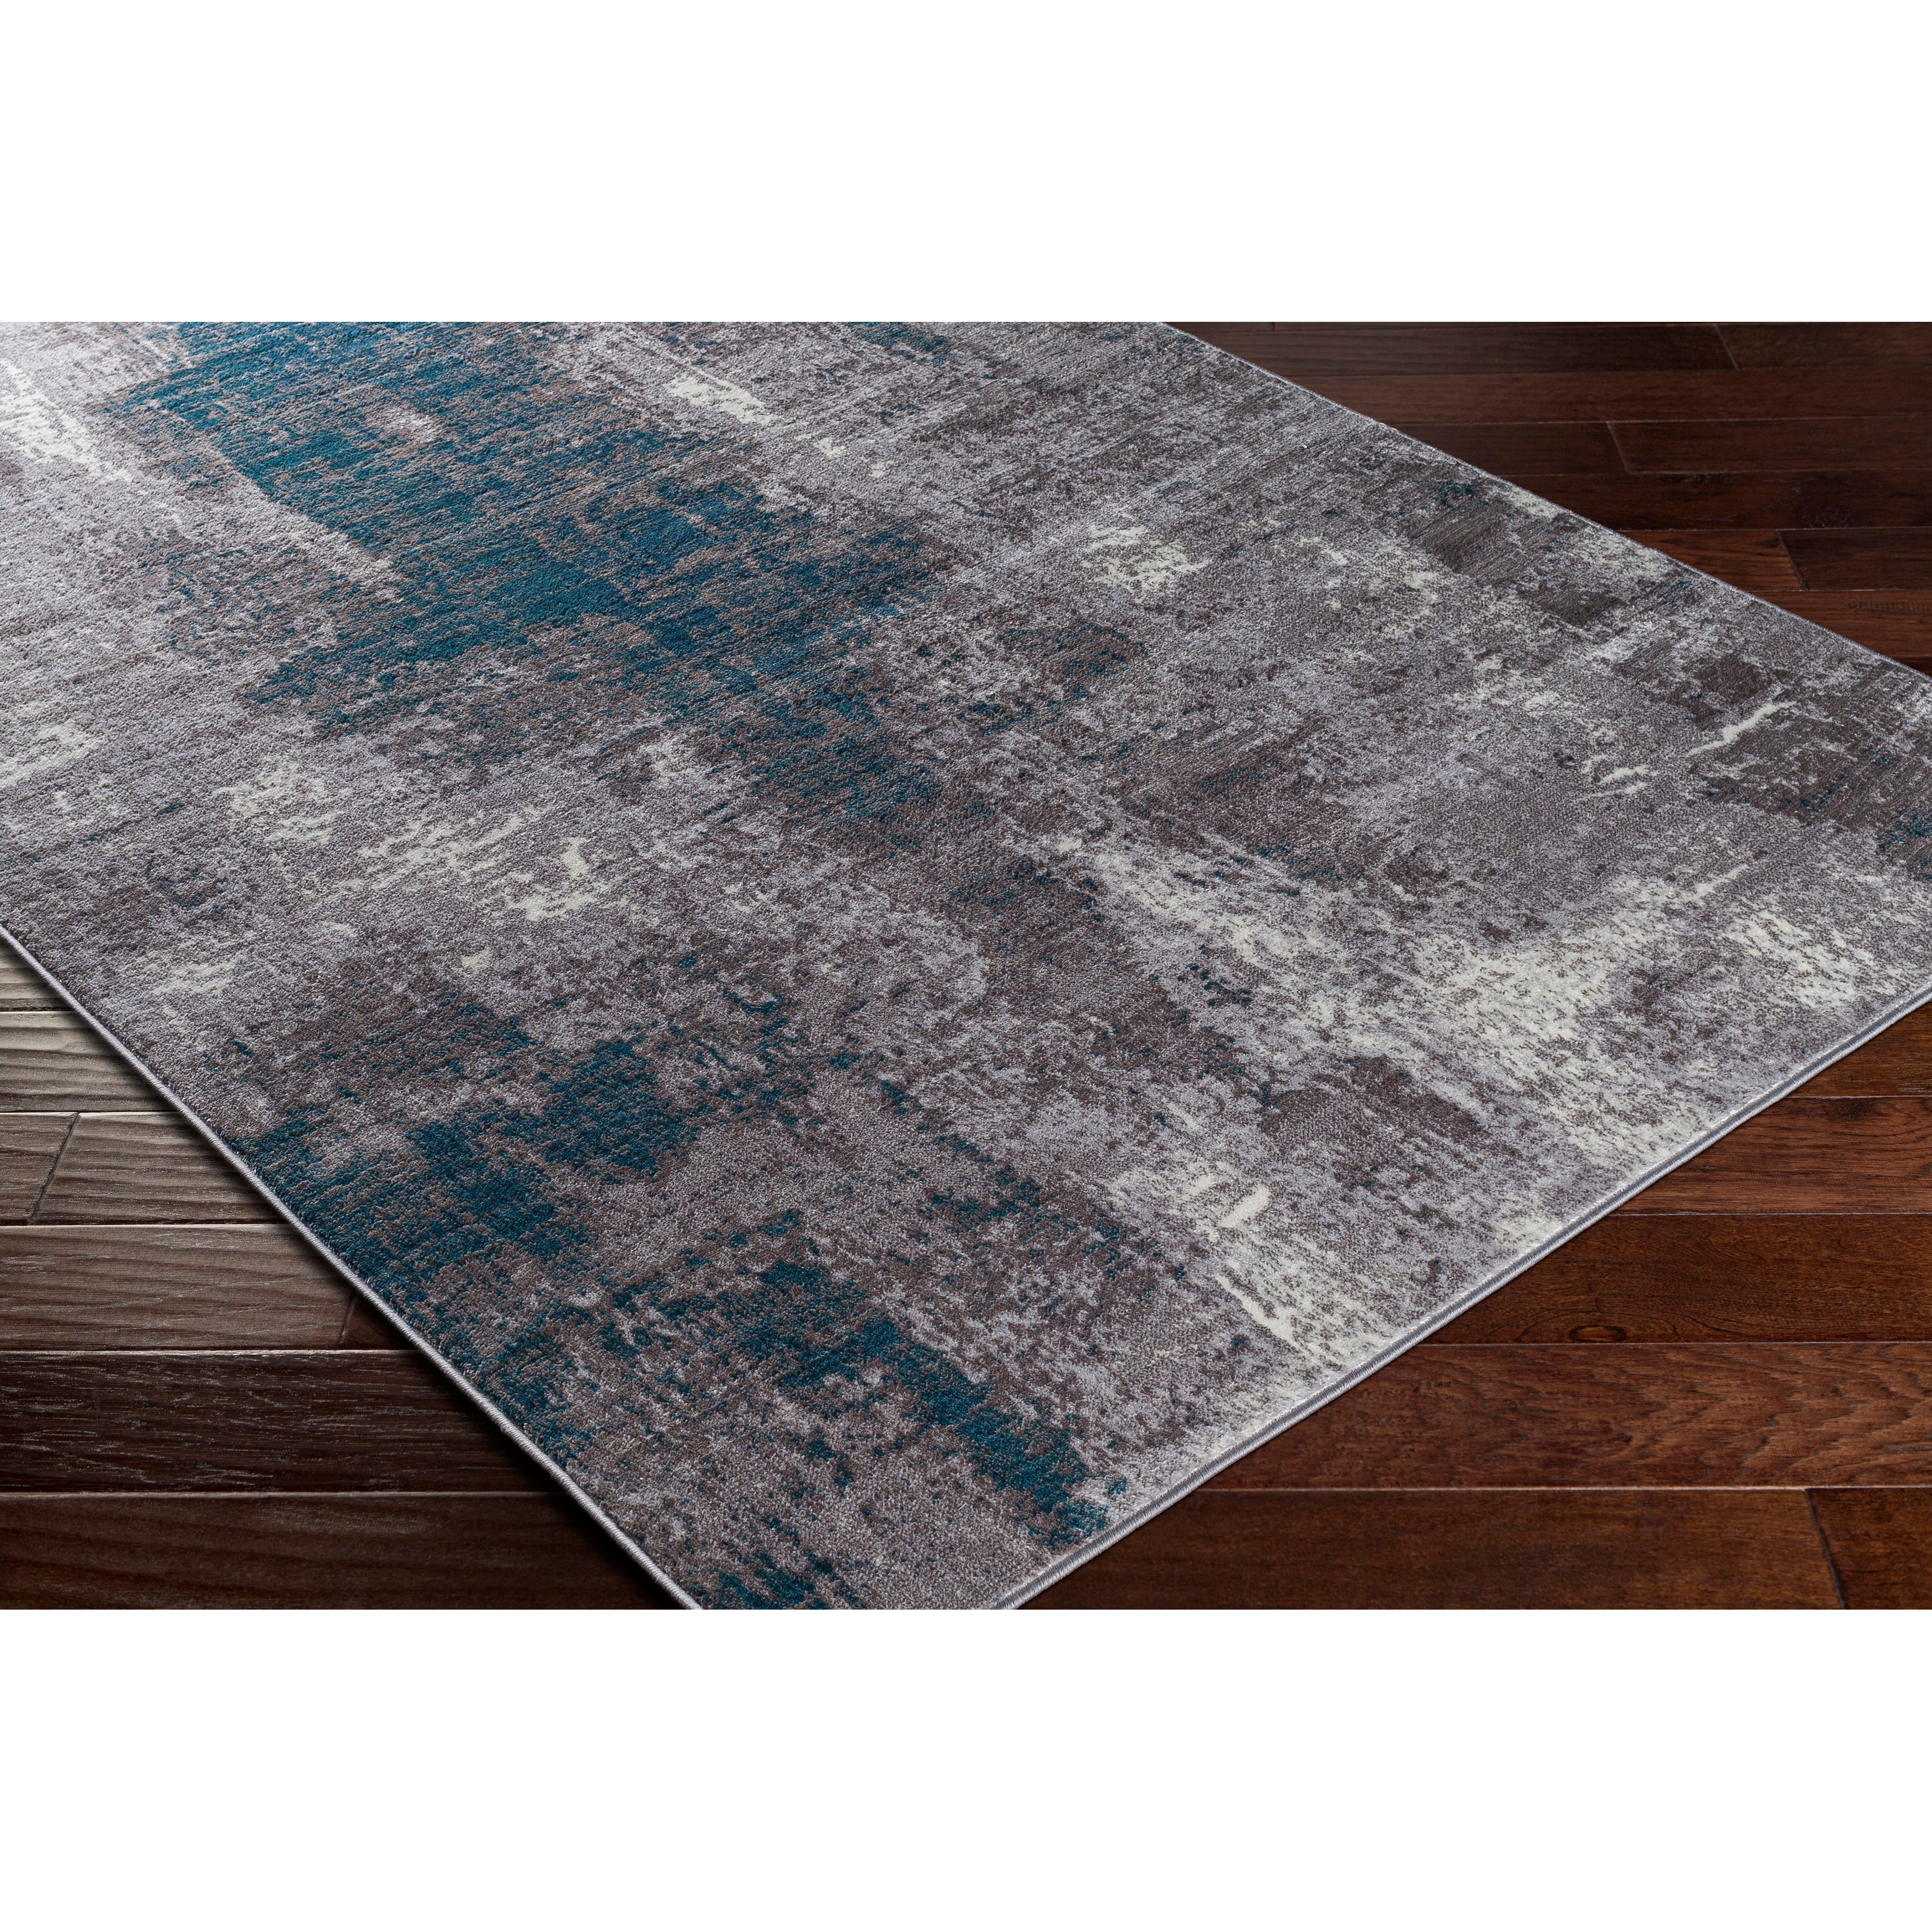 https://ak1.ostkcdn.com/images/products/is/images/direct/76bc79e76ec62683c31d595f7ef8595aa1f81fd9/Cooke-Industrial-Abstract-Polyester-Area-Rug.jpg